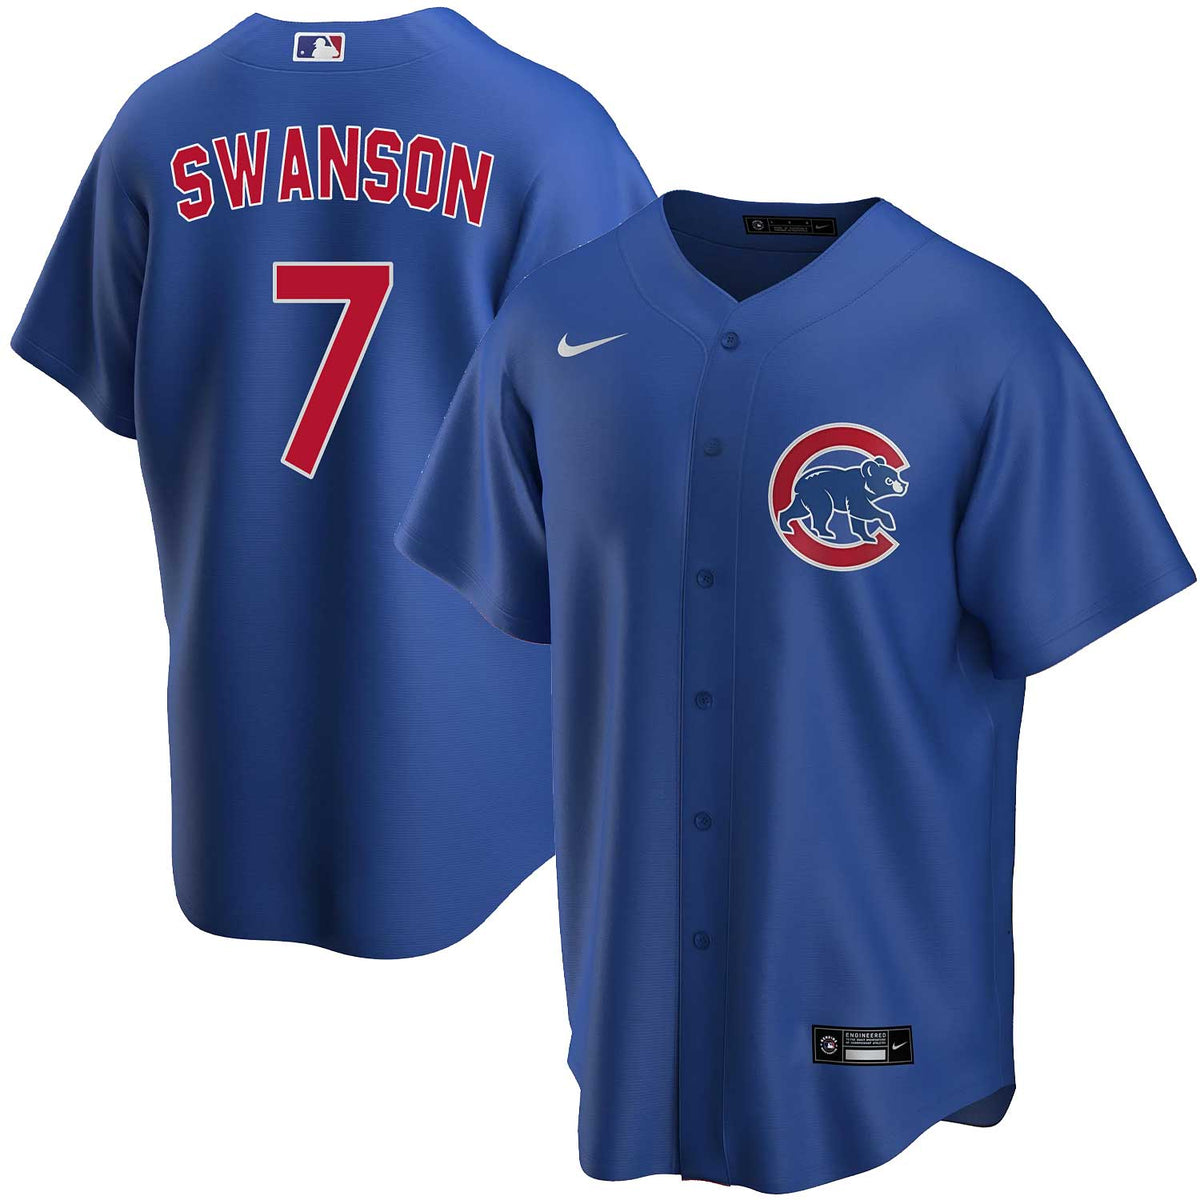 Men's Nike Dansby Swanson Royal Chicago Cubs Name & Number T-Shirt